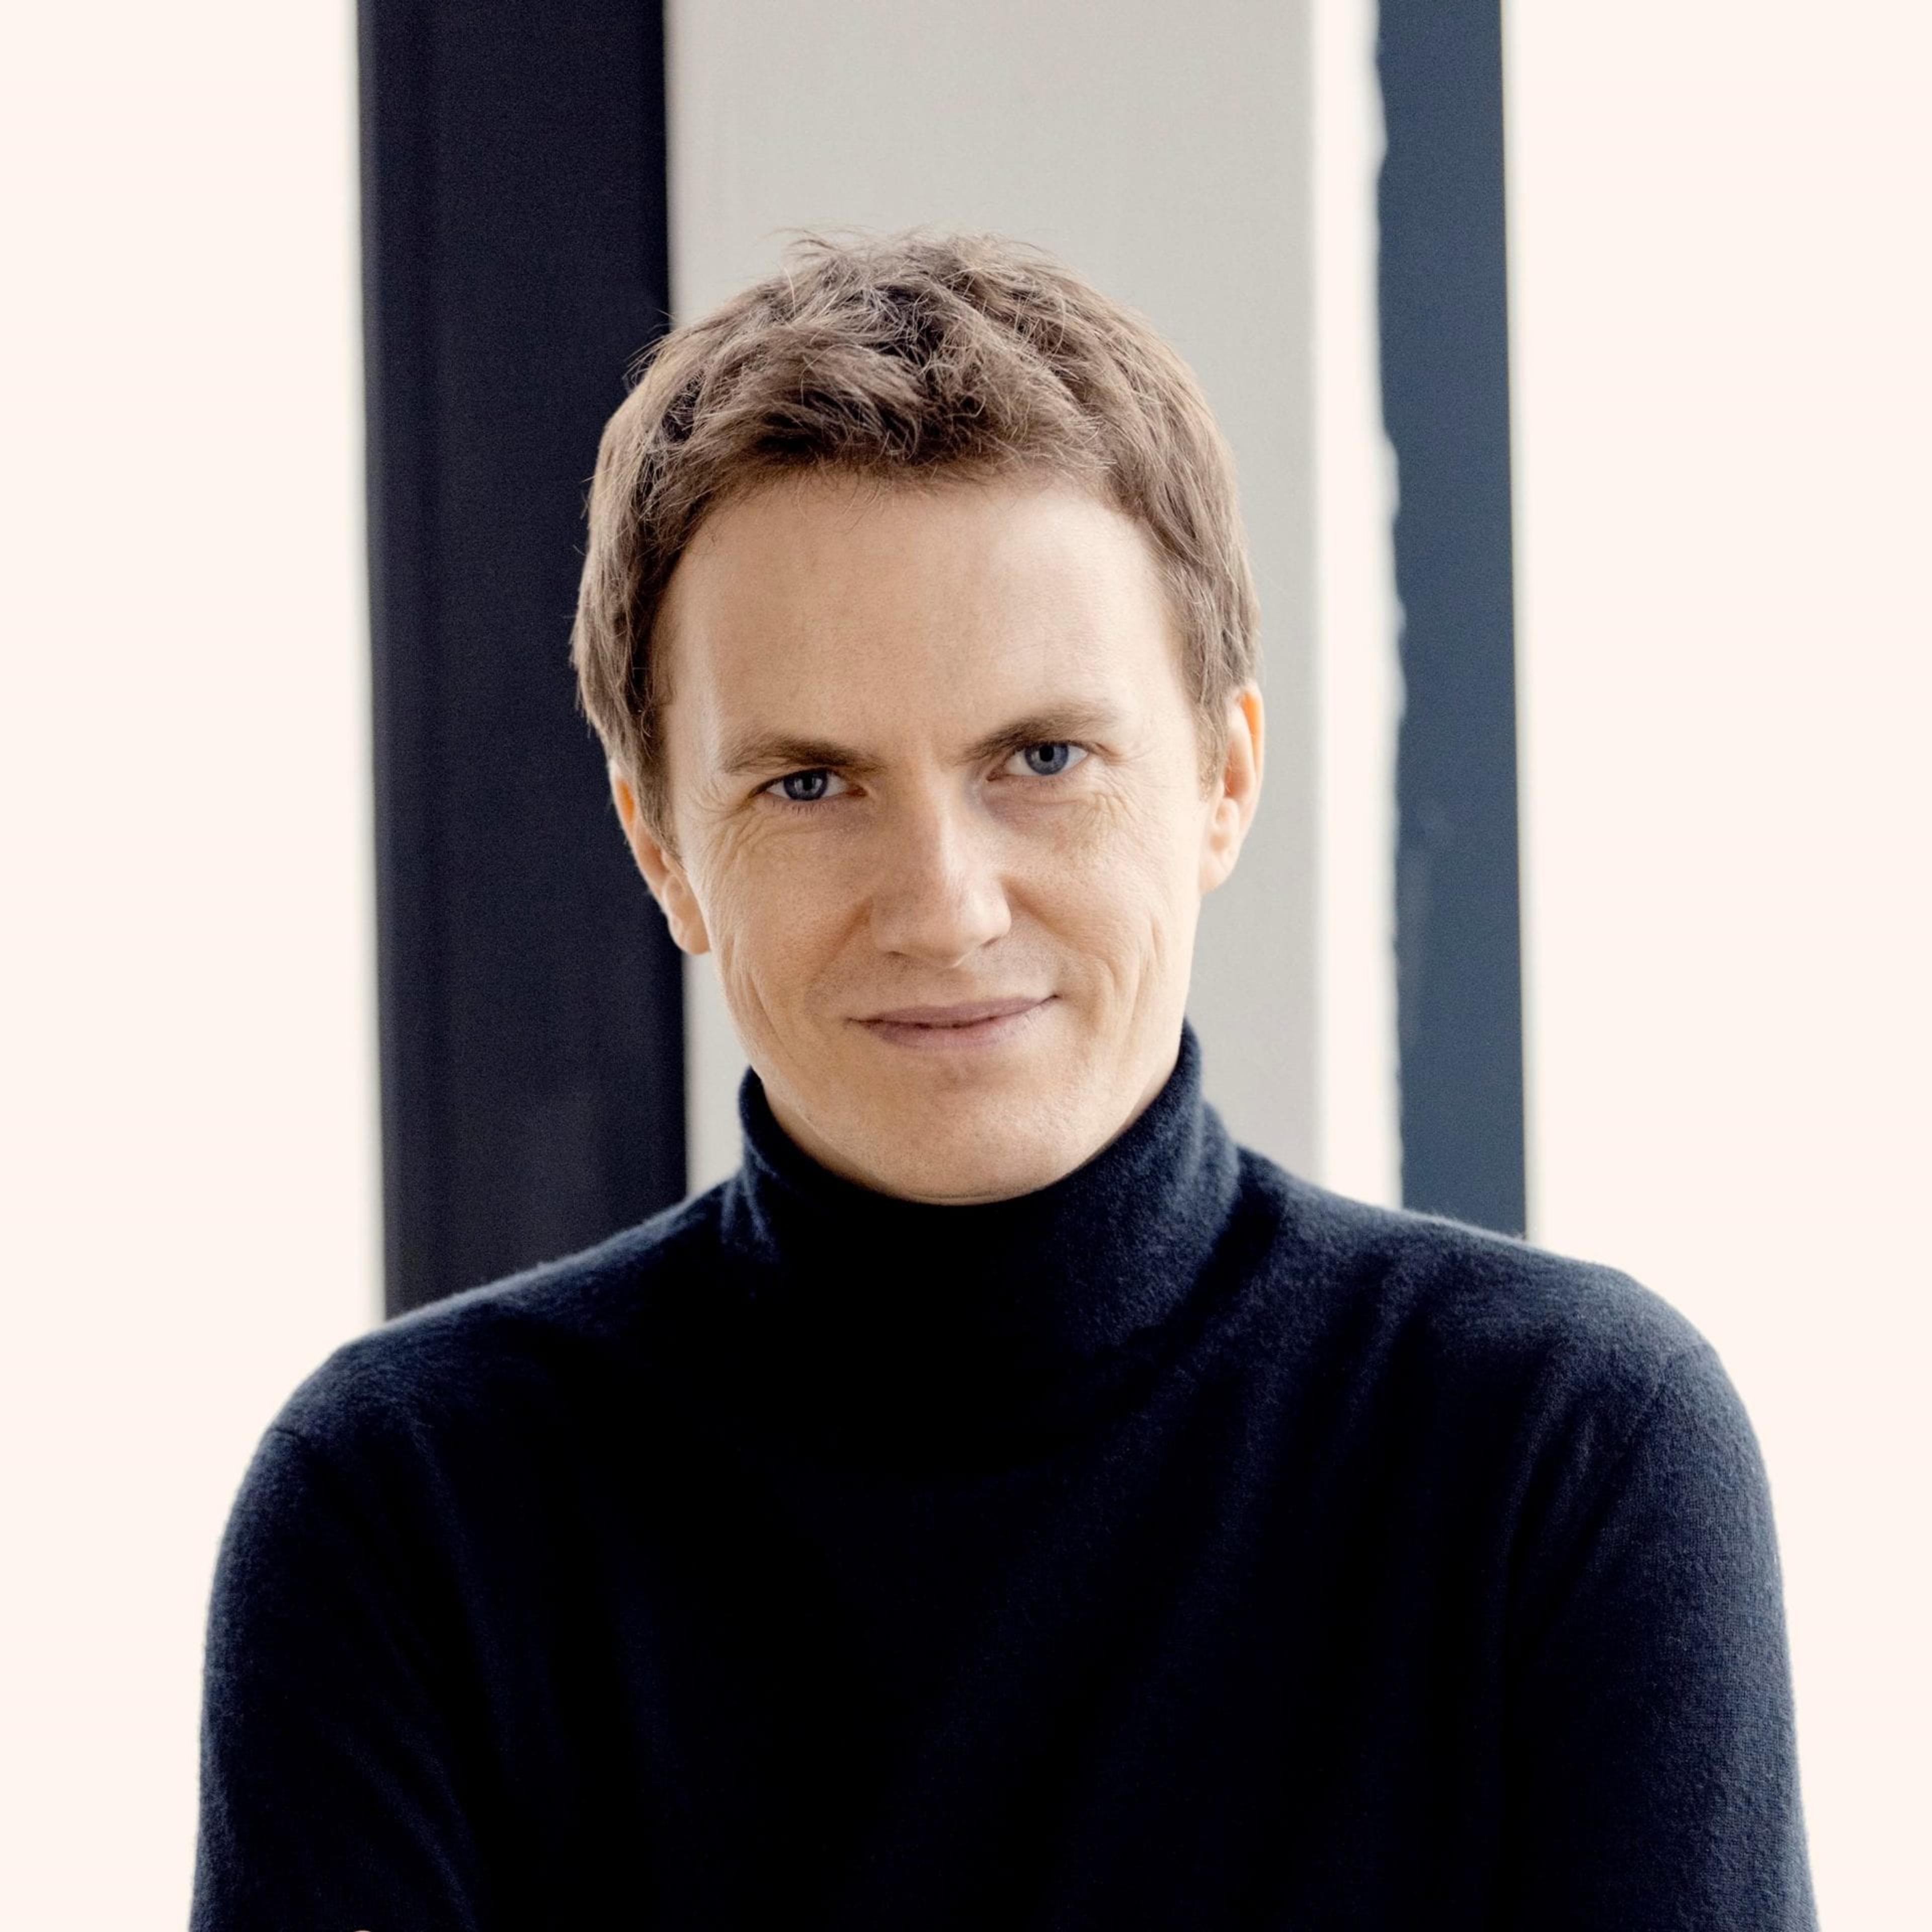 Promotional photograph of Alexandre Tharaud